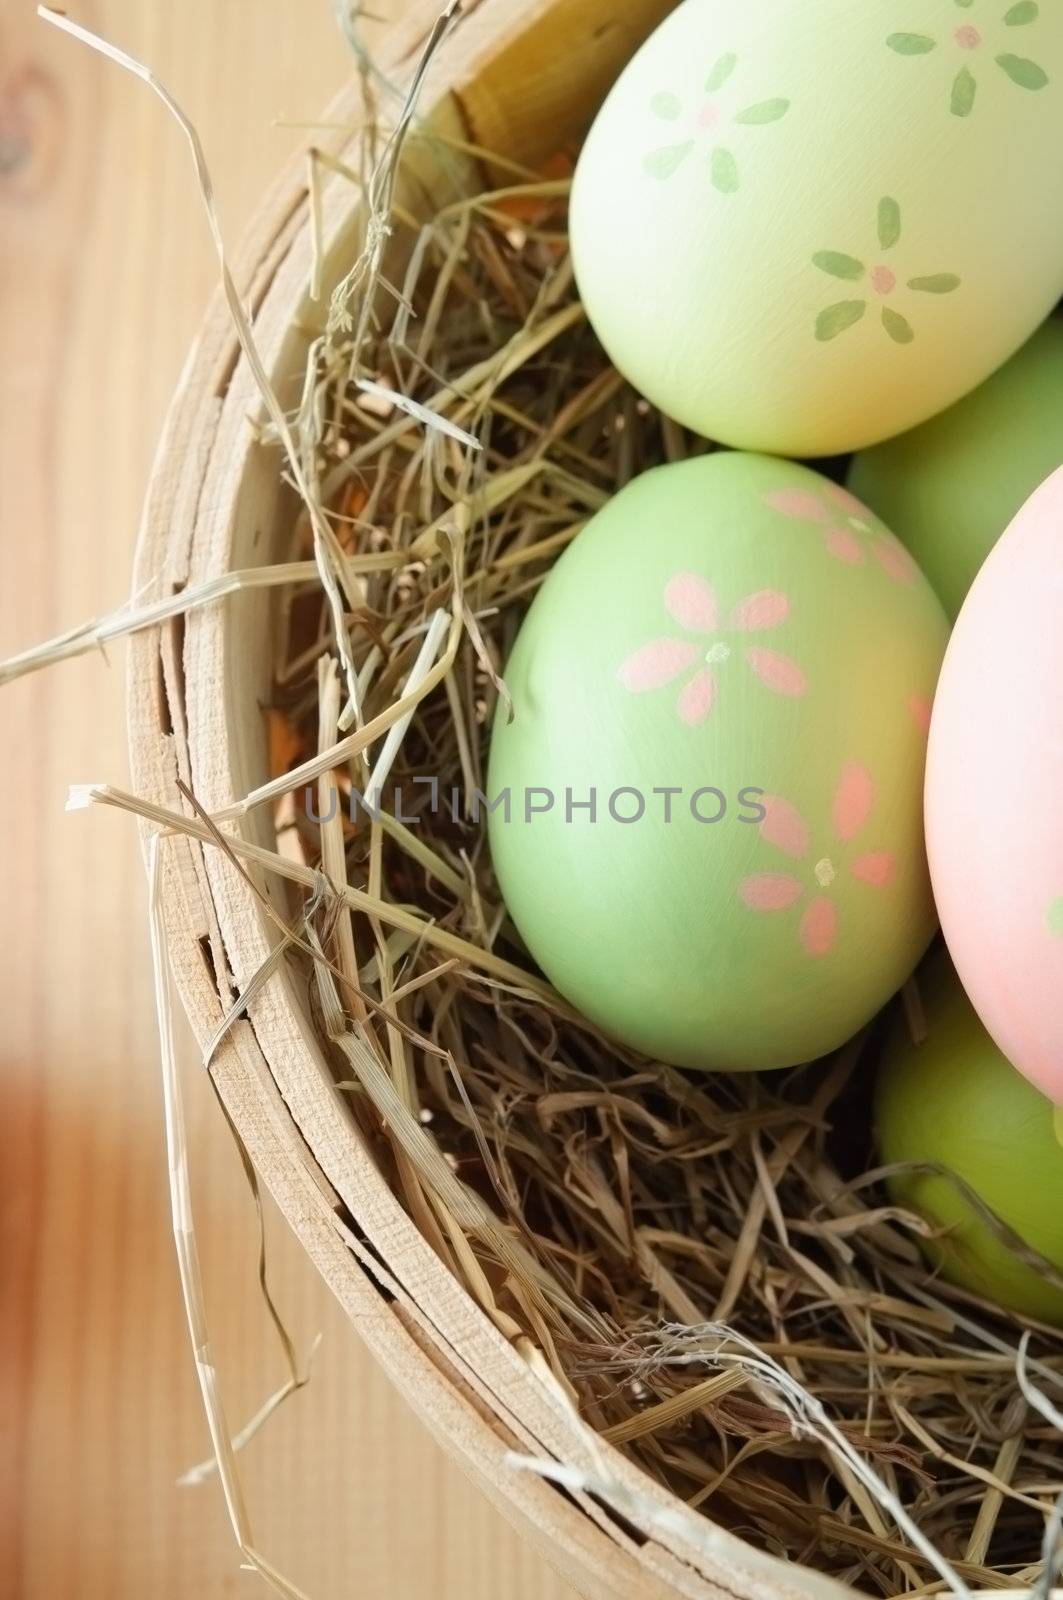 Overhead close up shot of hand painted Easter eggs nestling in straw in a basket on a wooden table.  Portrait orientation.